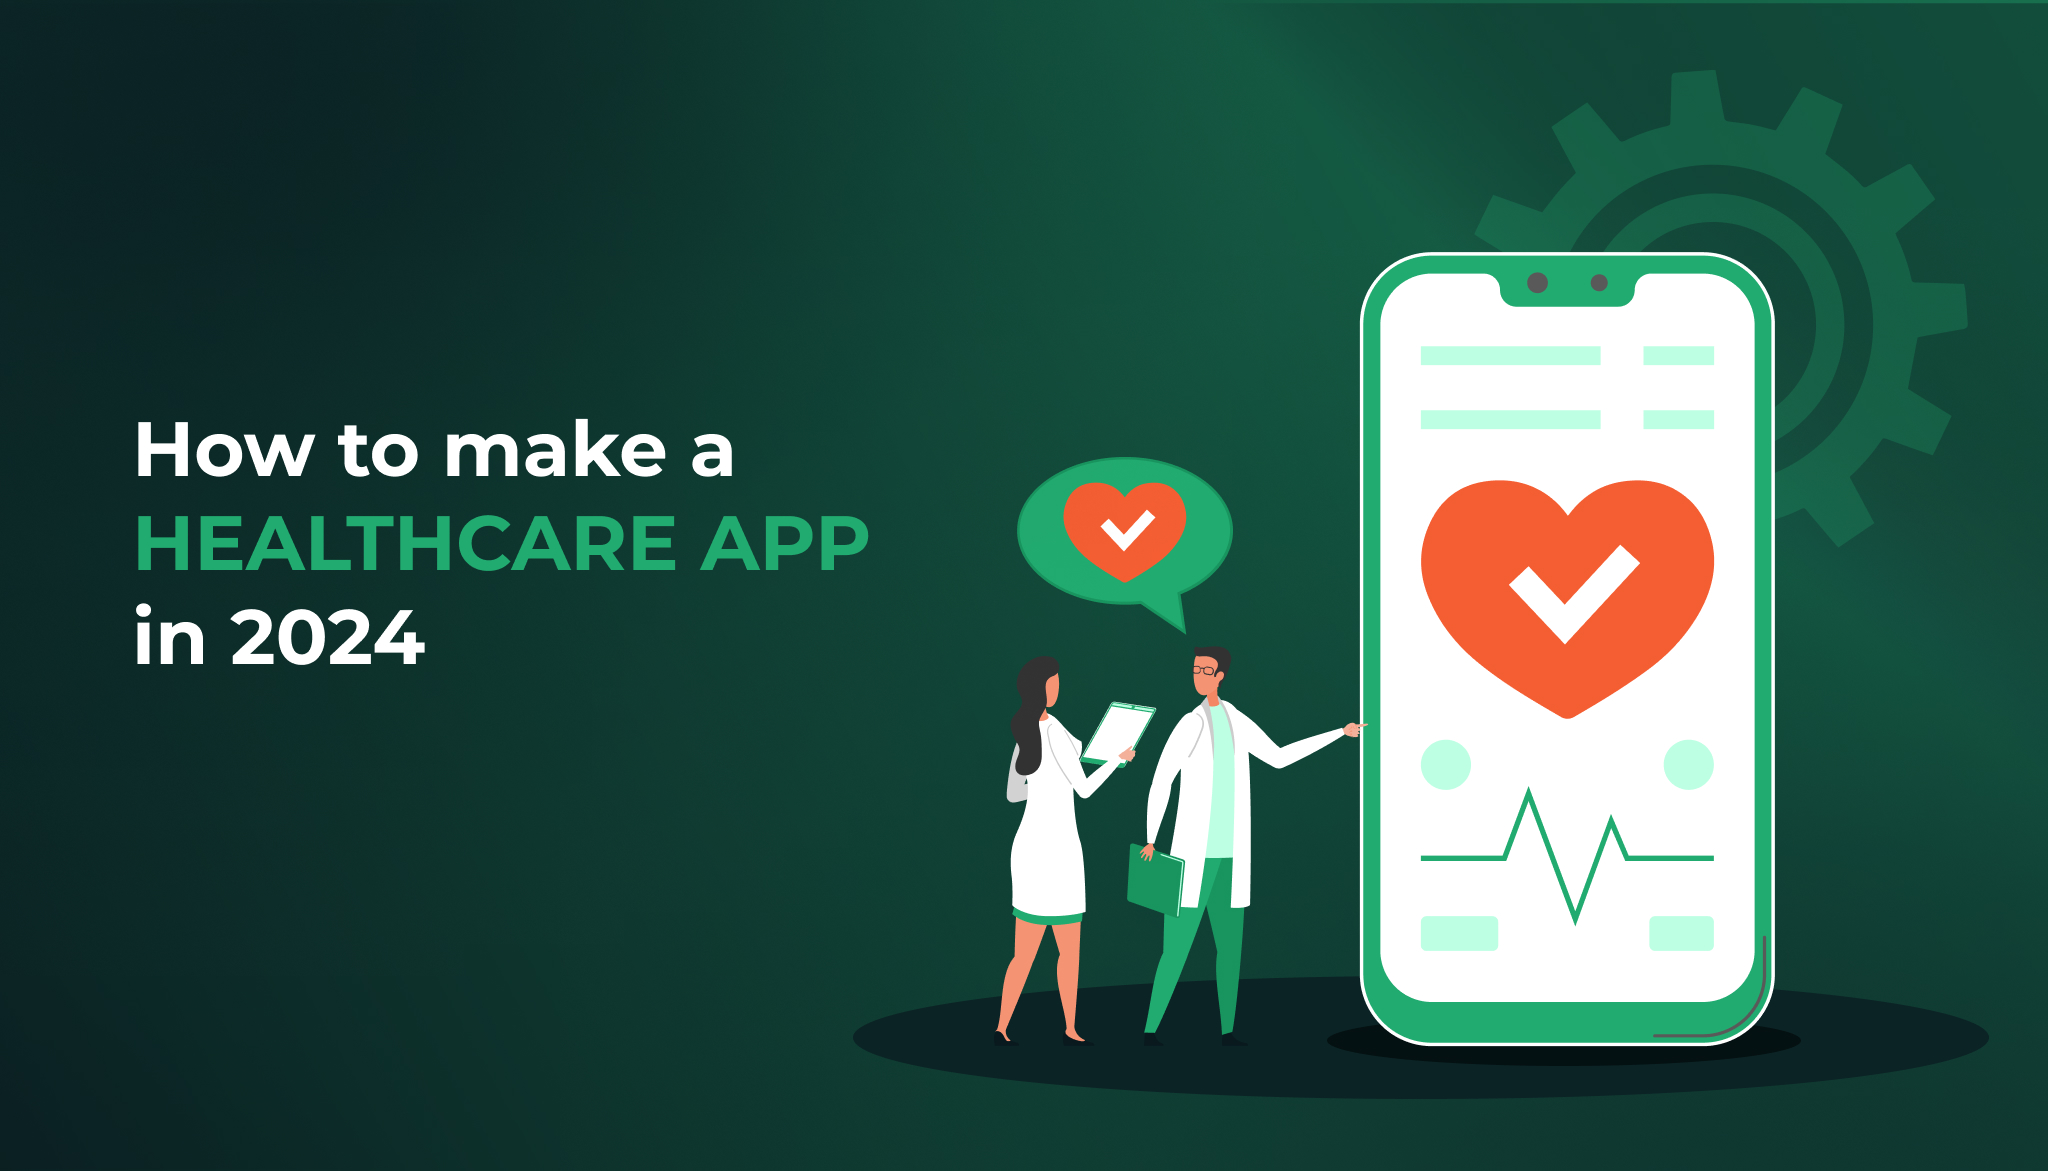 Step-by-Step Guide to Developing a Healthcare App in 2024